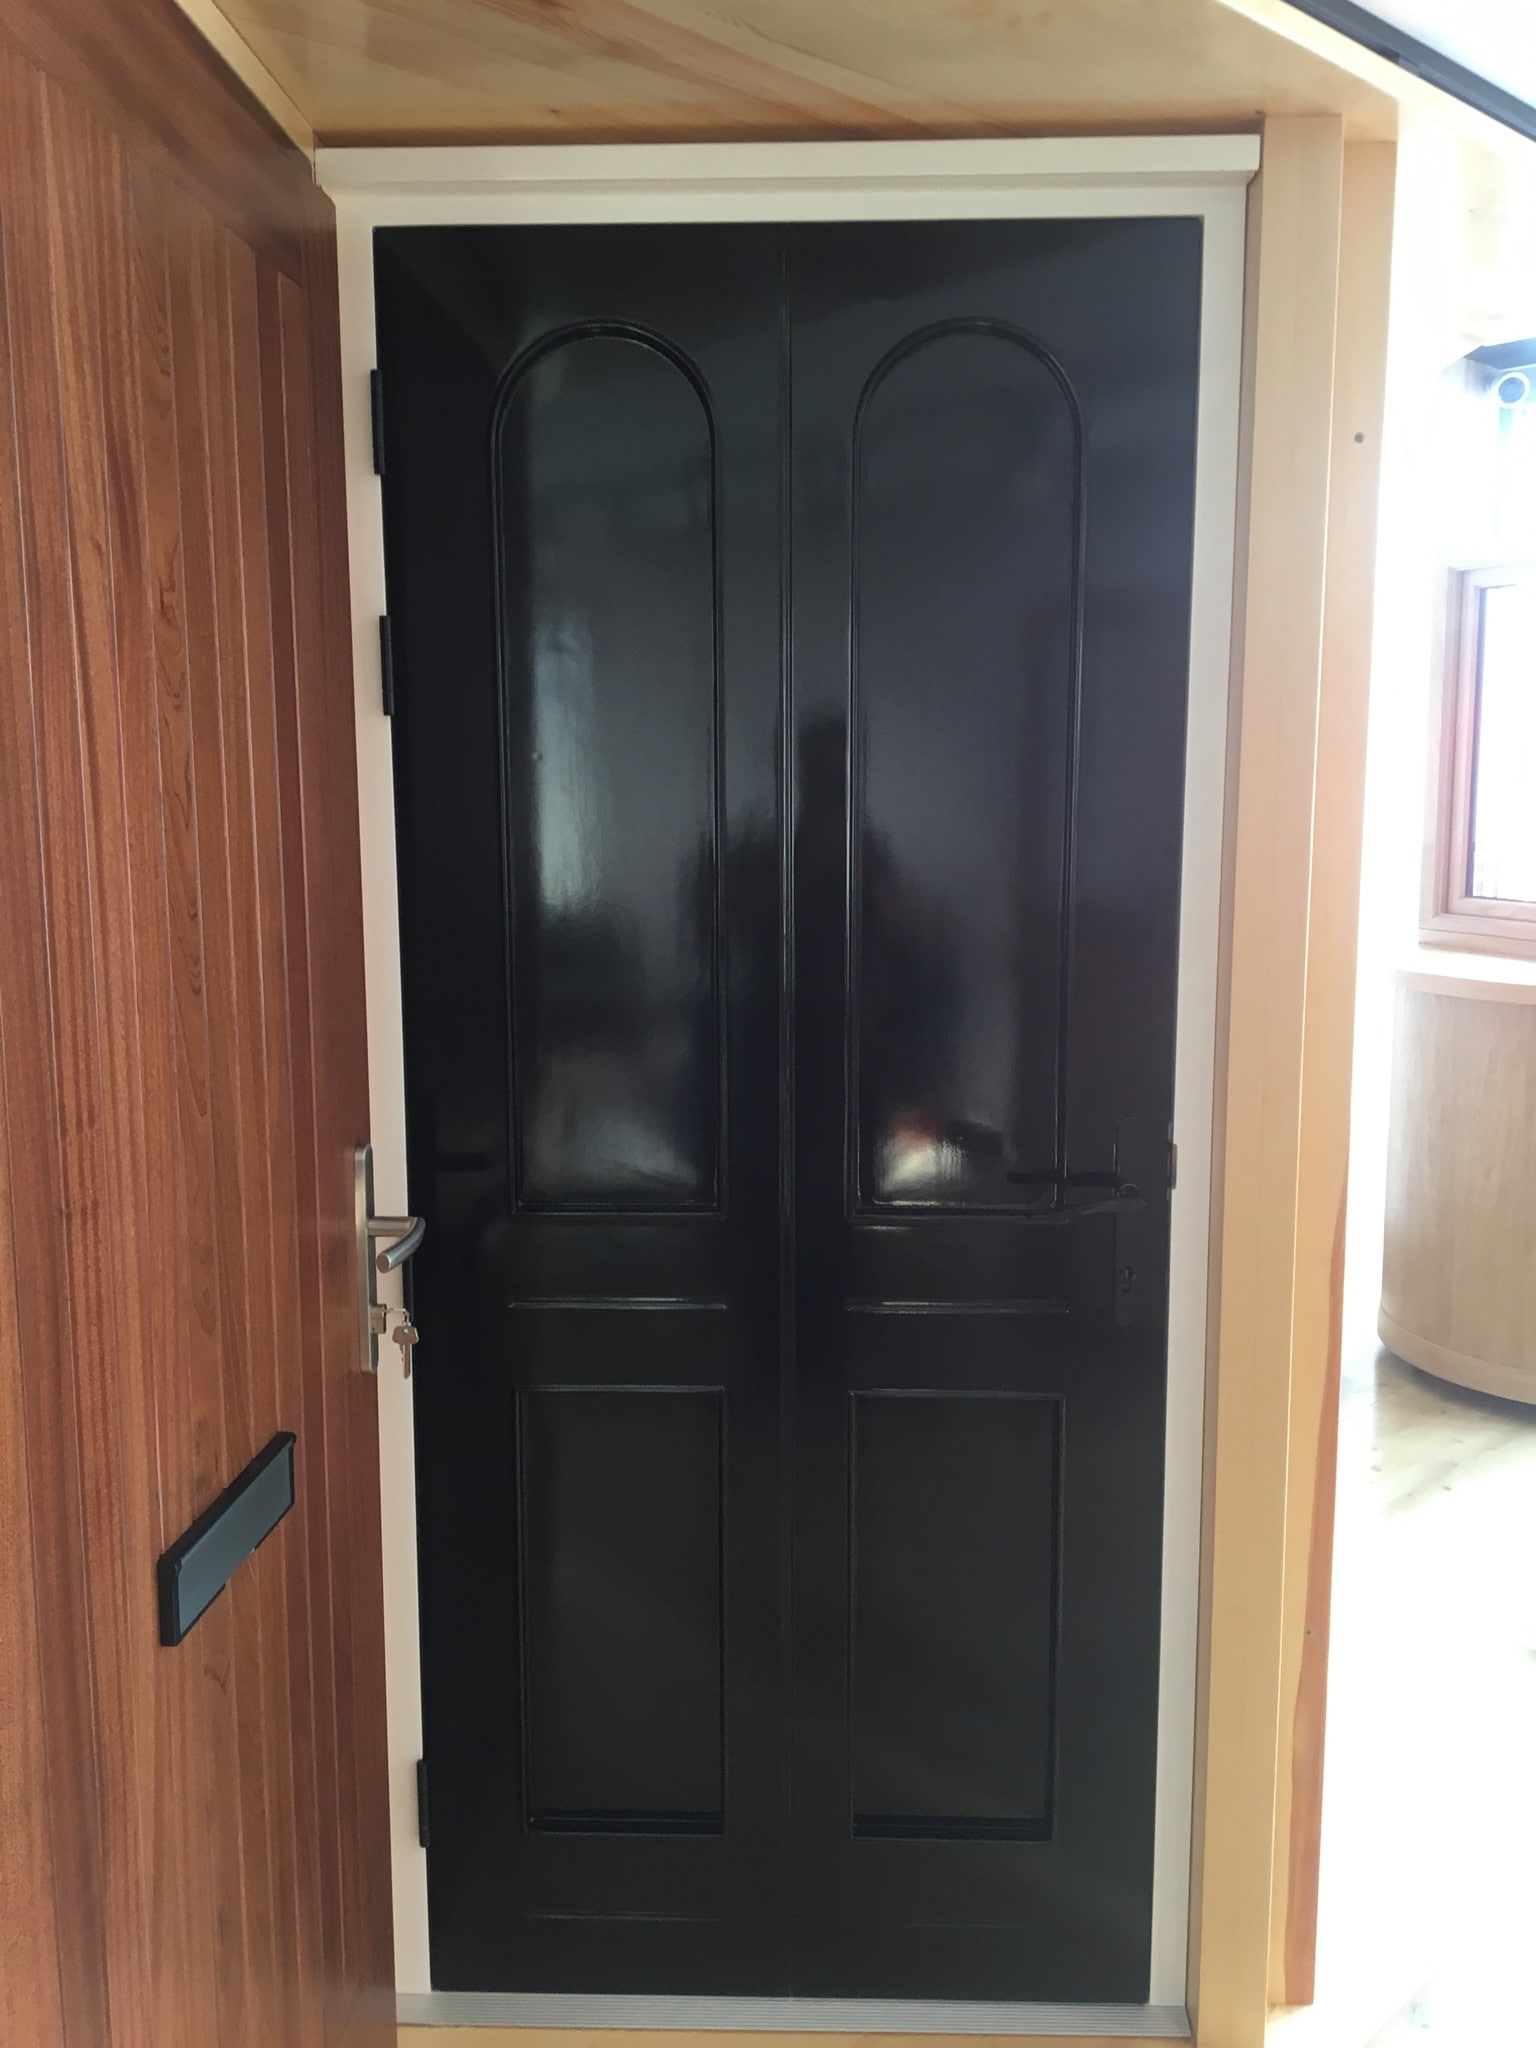 Four panel hardwood front door, factory fully finished in two colours - inside white and outside black. Multi point lock.